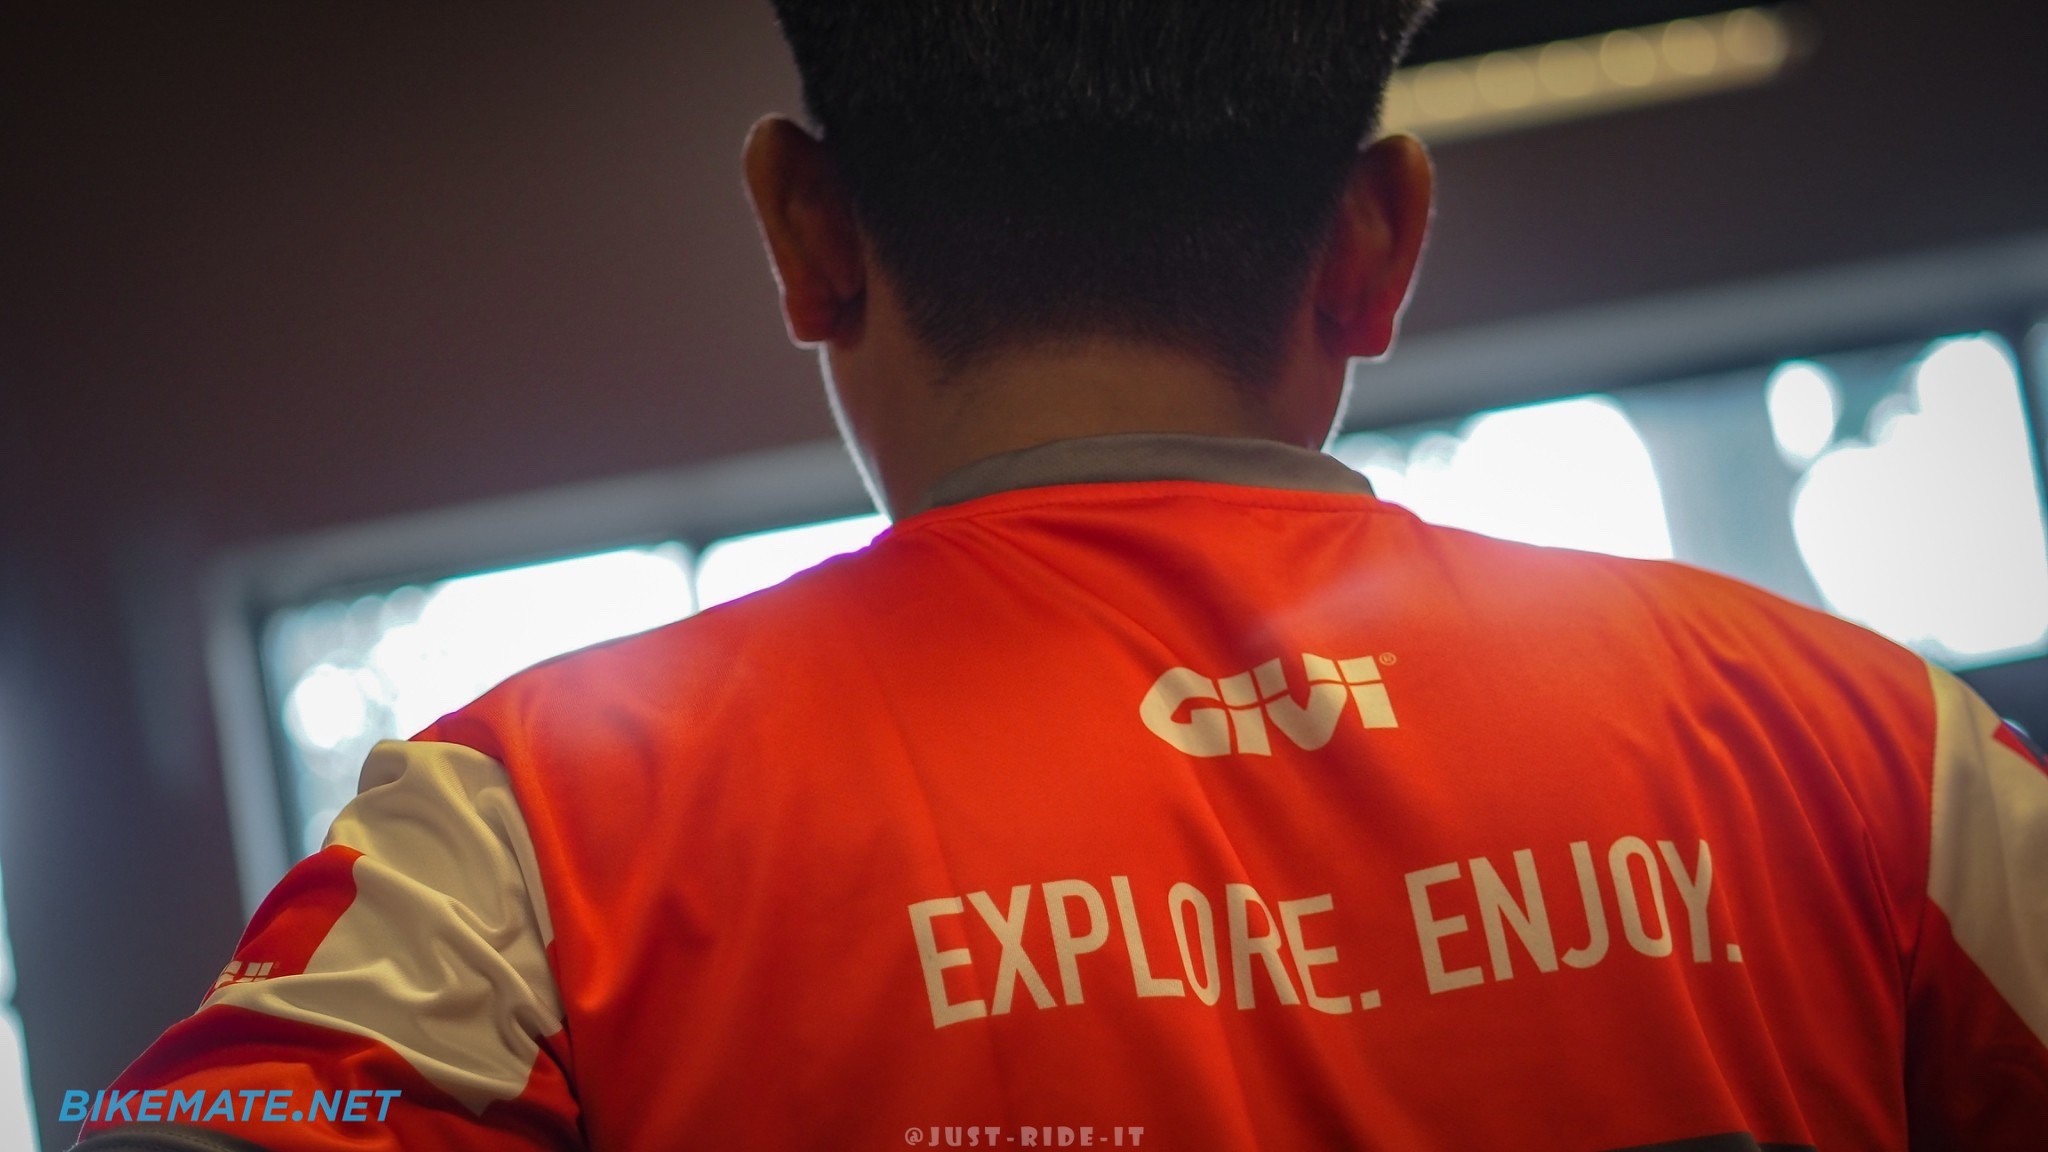 GIVI shirt with slogan printed on the back